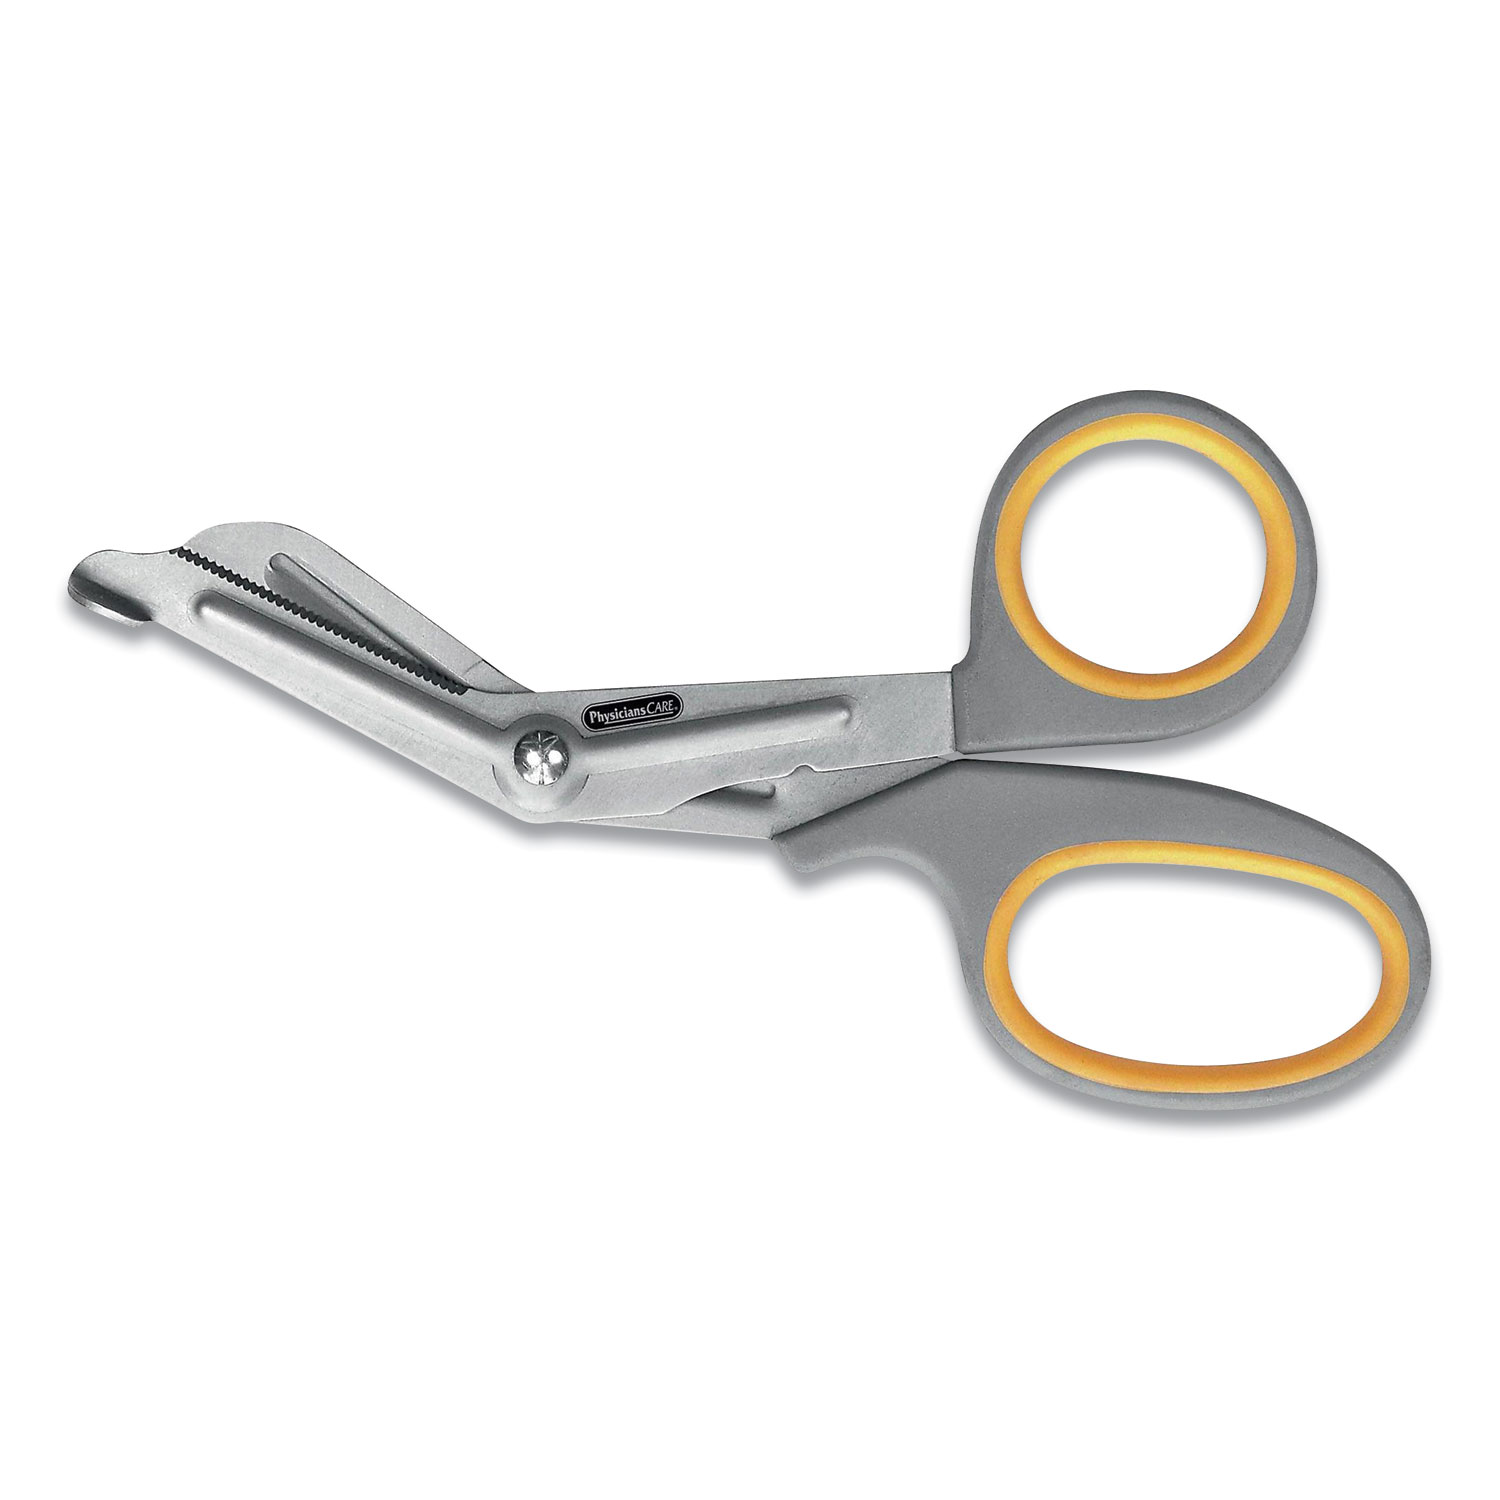  First Aid Only 90292 Titanium-Bonded Angled Medical Shears, 7 Long, 3 Cut Length, Gray/Yellow Offset Handle (FAO940750) 